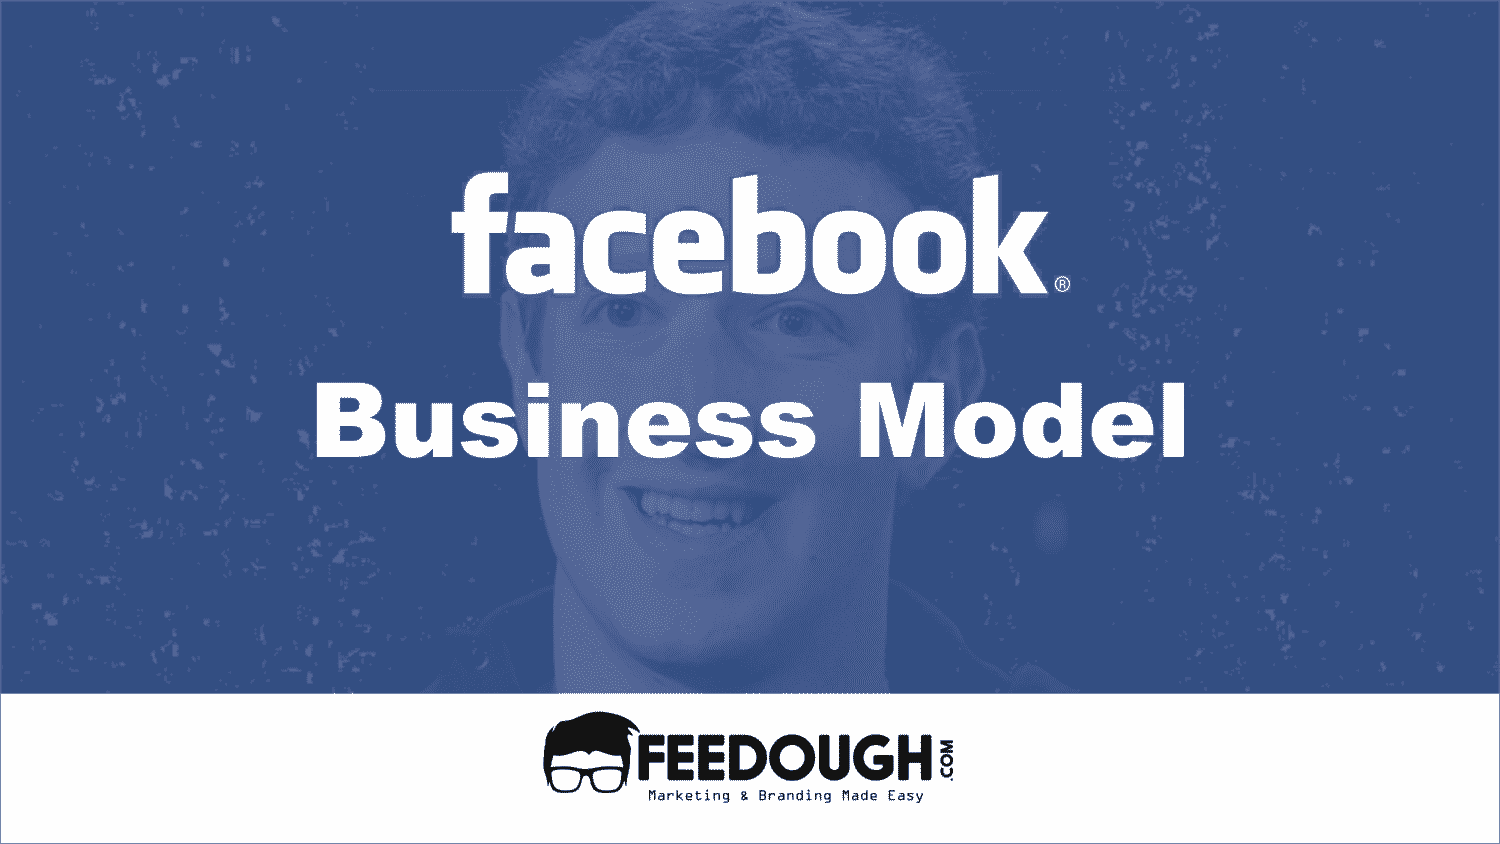 Exactimo - What is Facebook's Business Model & Why Is it Being Regulated?